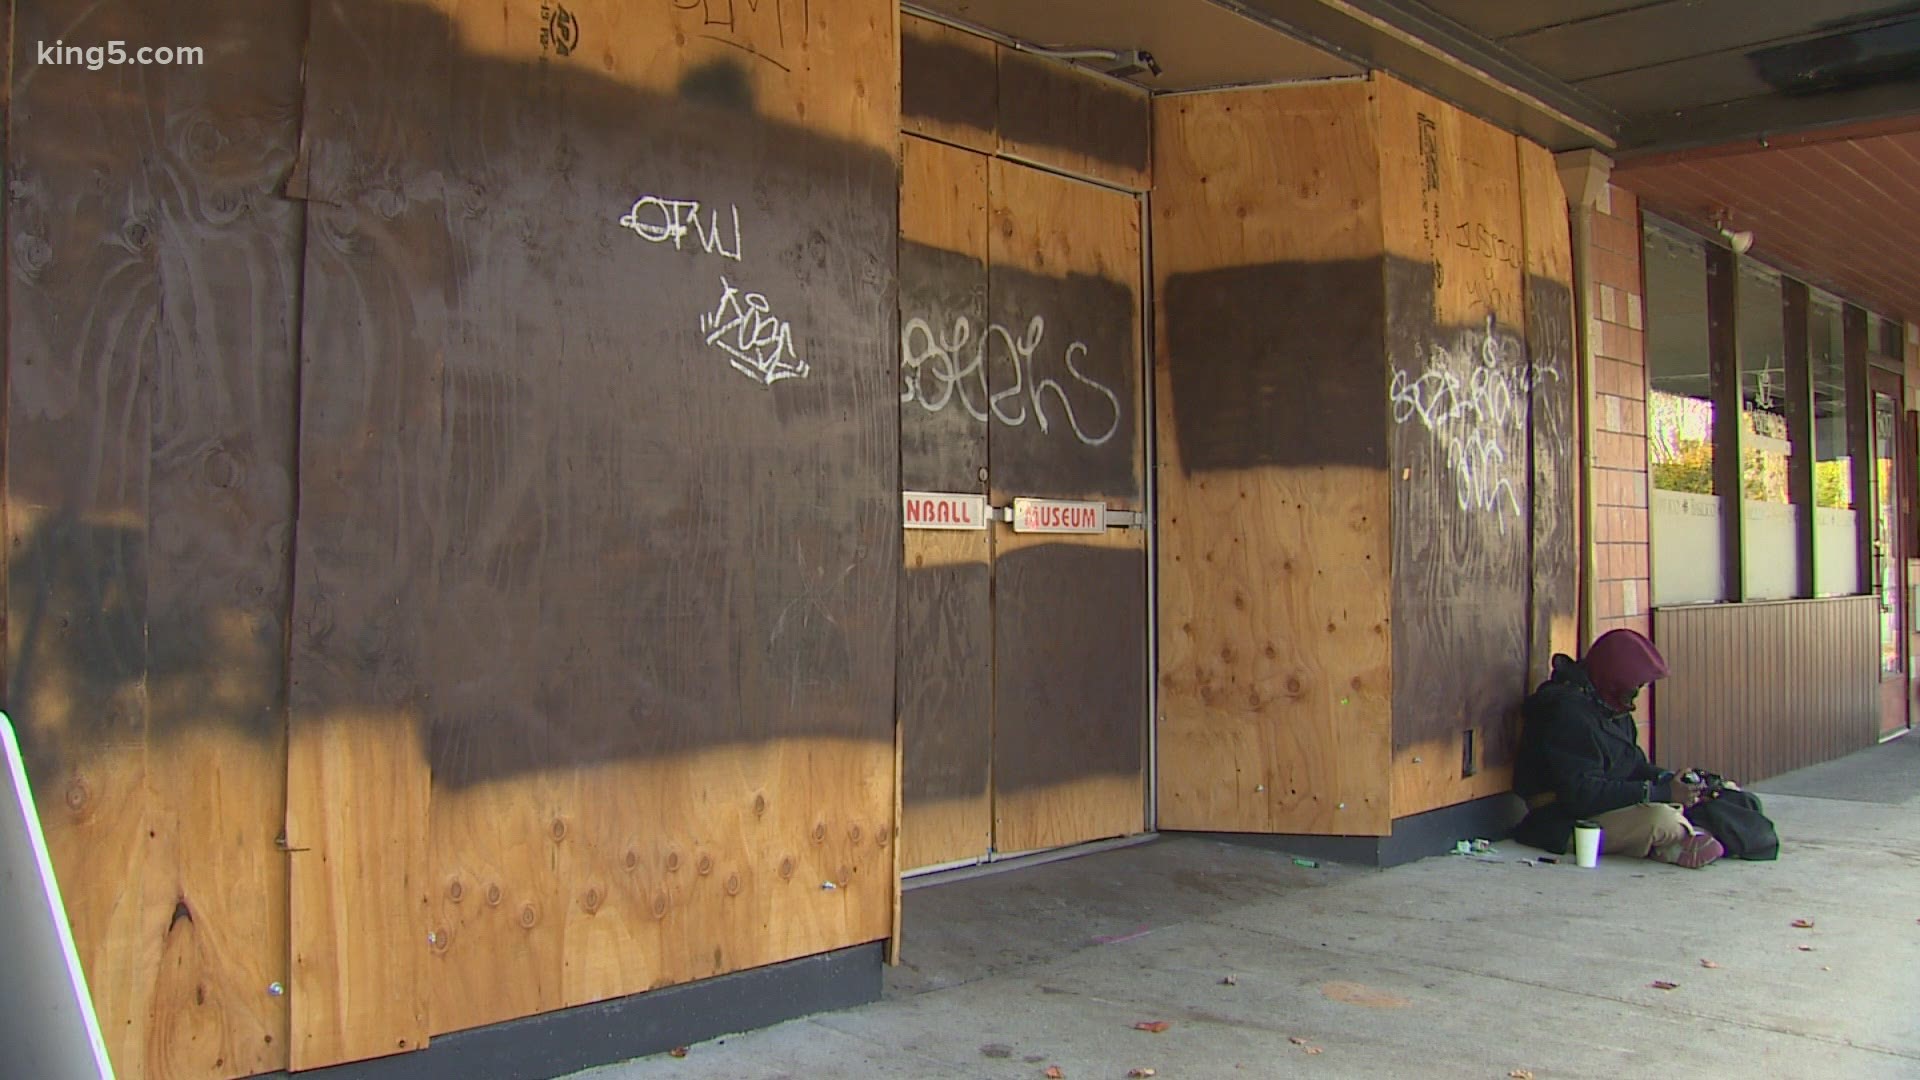 Many Olympia businesses boarded up when COVID hit, and stayed shuttered during violent protests this summer. Now owners are worried about election unrest.